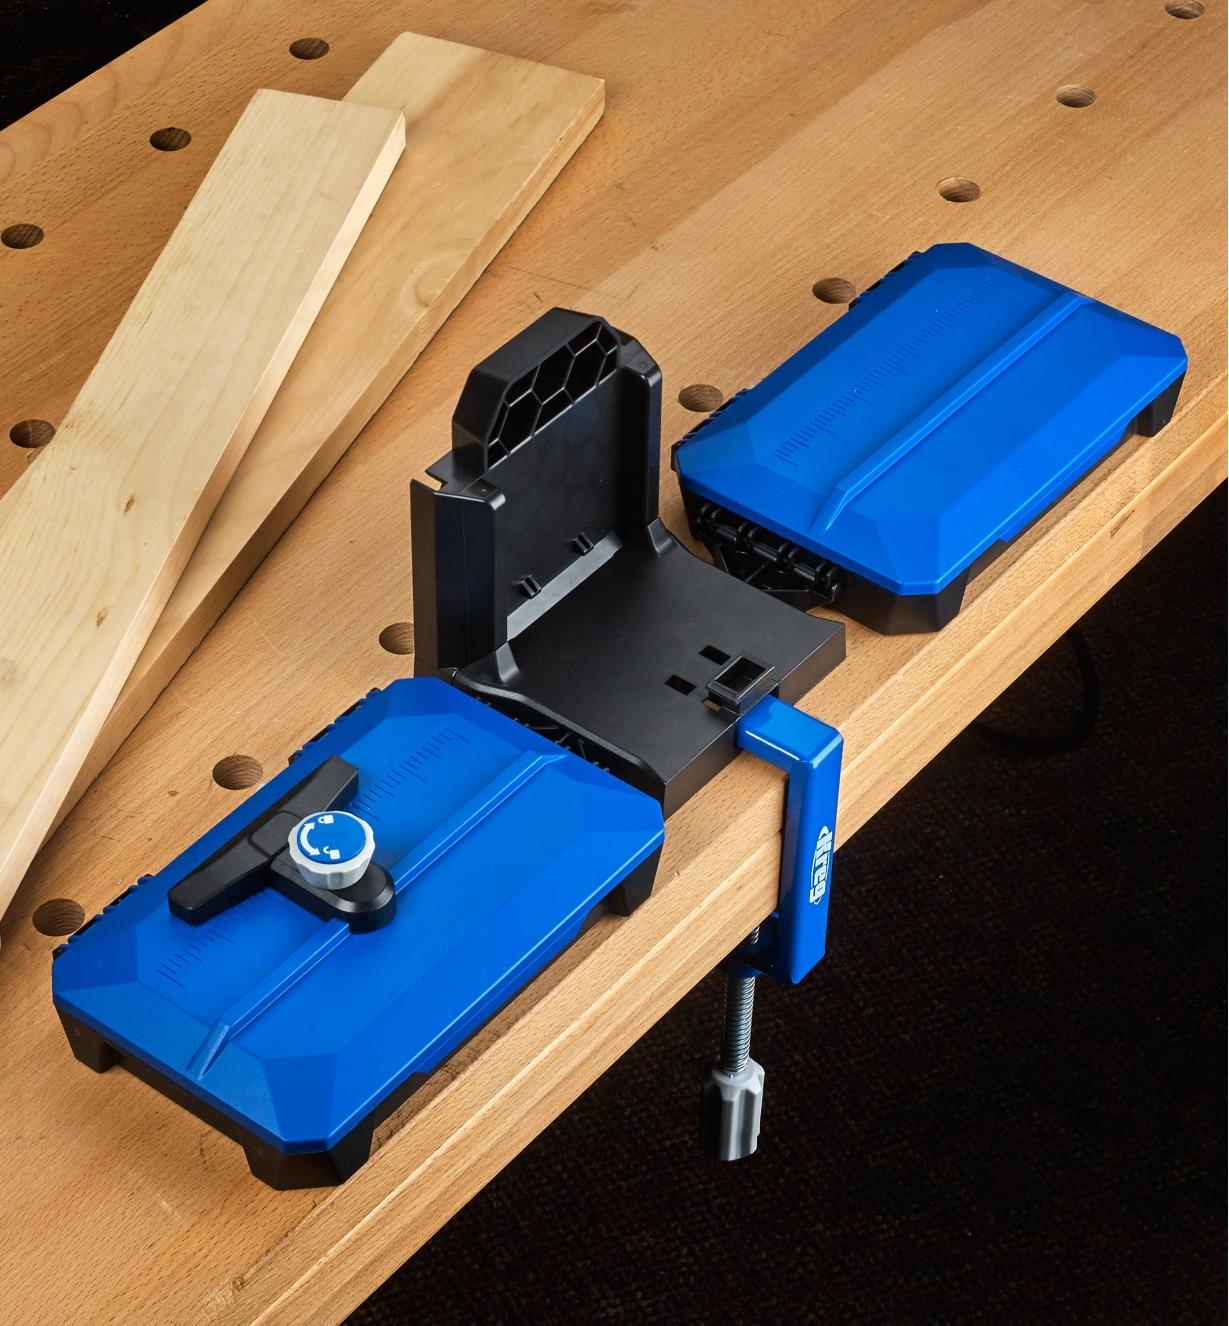 The Kreg docking station secured to a workbench with the included table clamp for greater stability